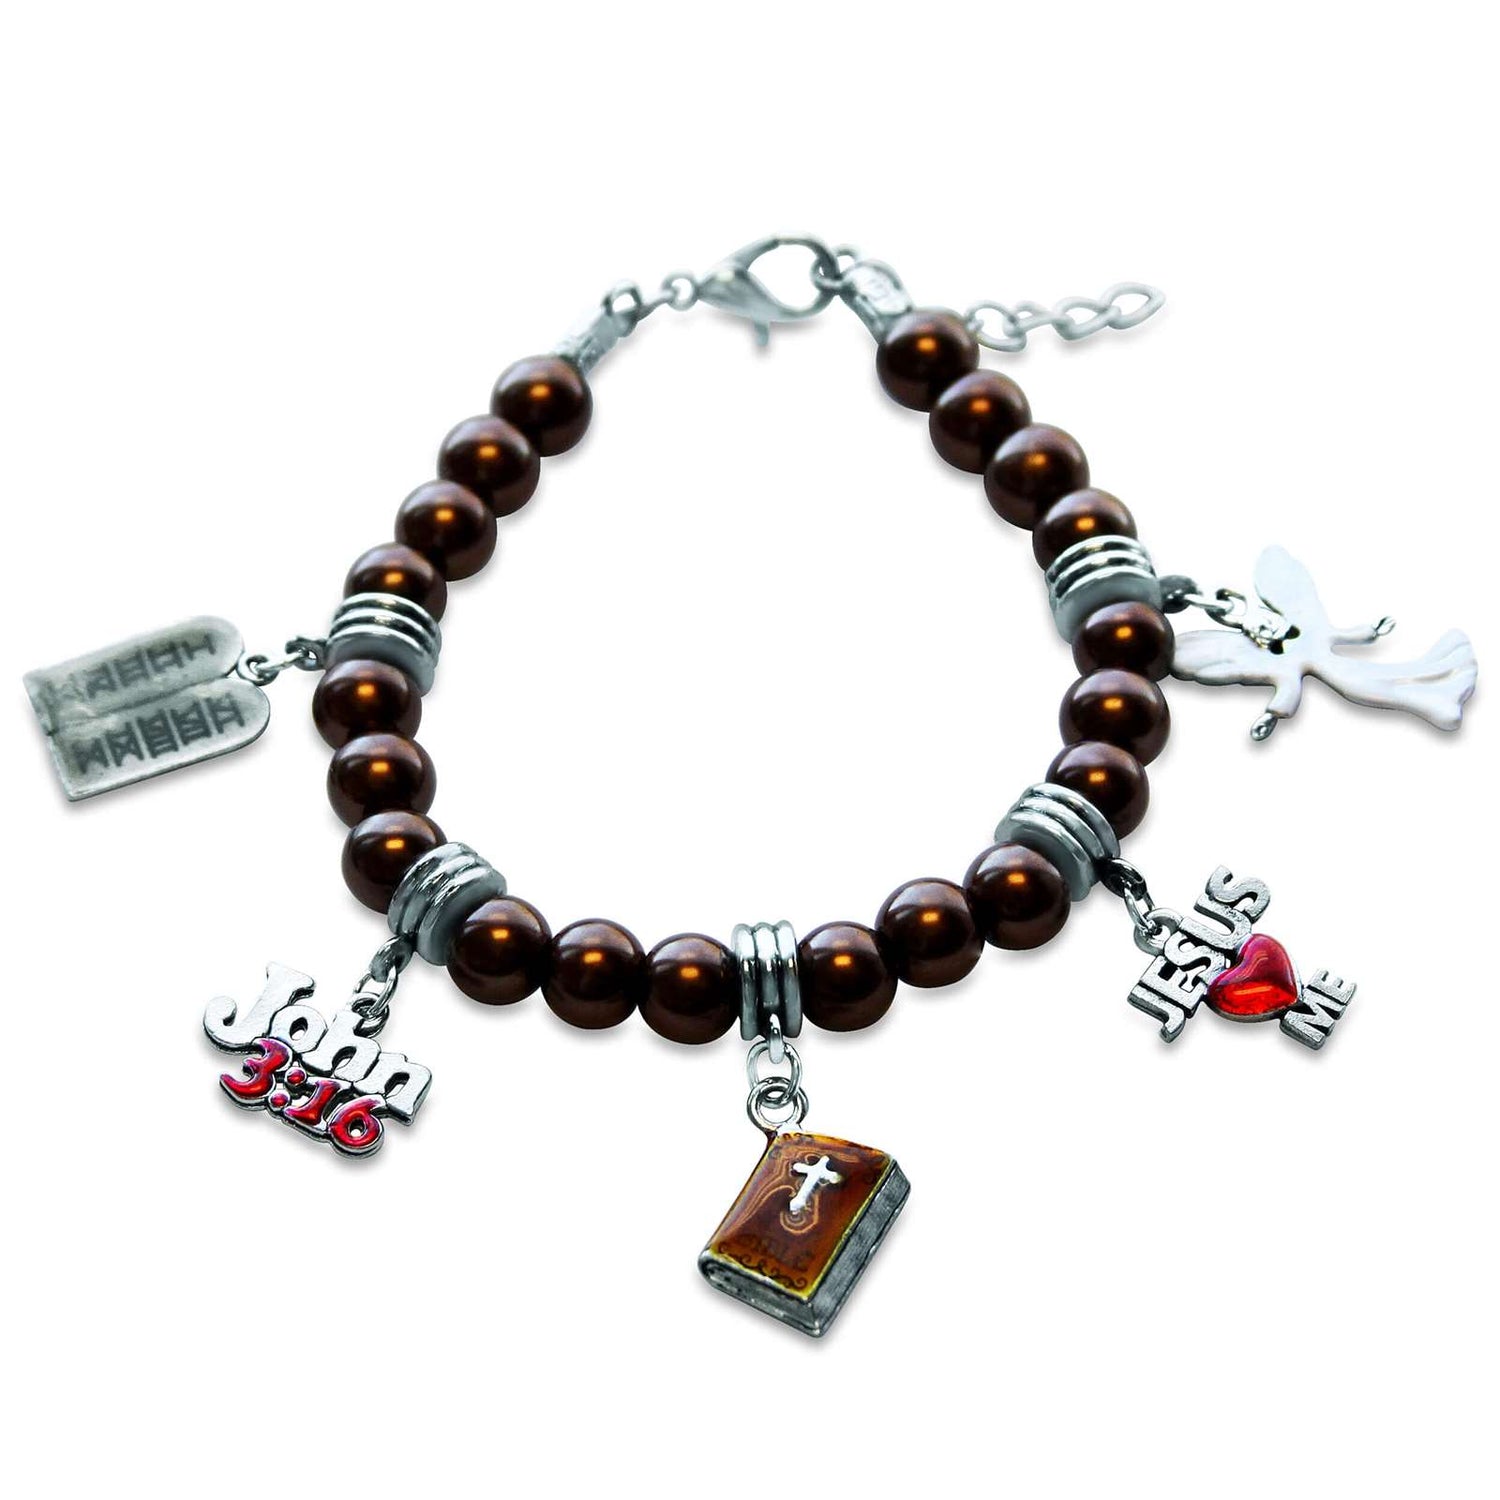 Whimsical Gifts | Religious Charm Bracelet | Cognac Glass Beaded Bracelet in Antique Silver Finish | Religious & Spiritual |  Jewelry